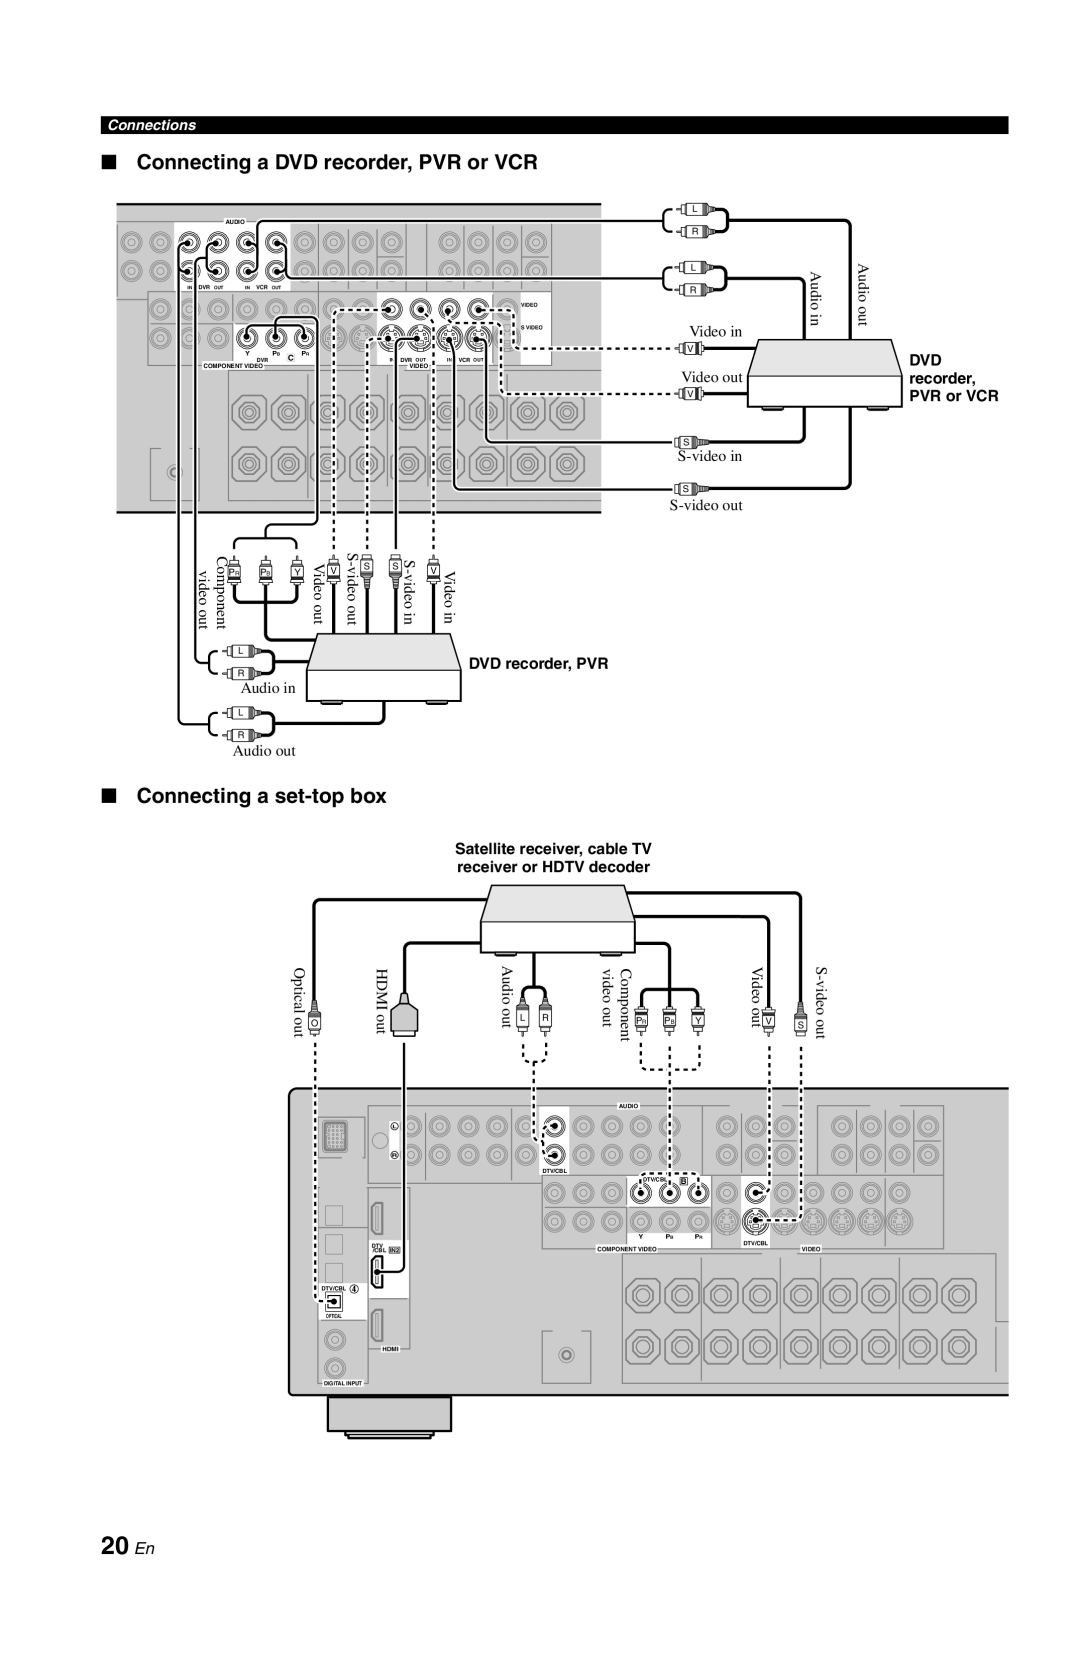 Yamaha DSP-AX861SE owner manual 20 En, Connecting a DVD recorder, PVR or VCR, Connecting a set-topbox, Connections 